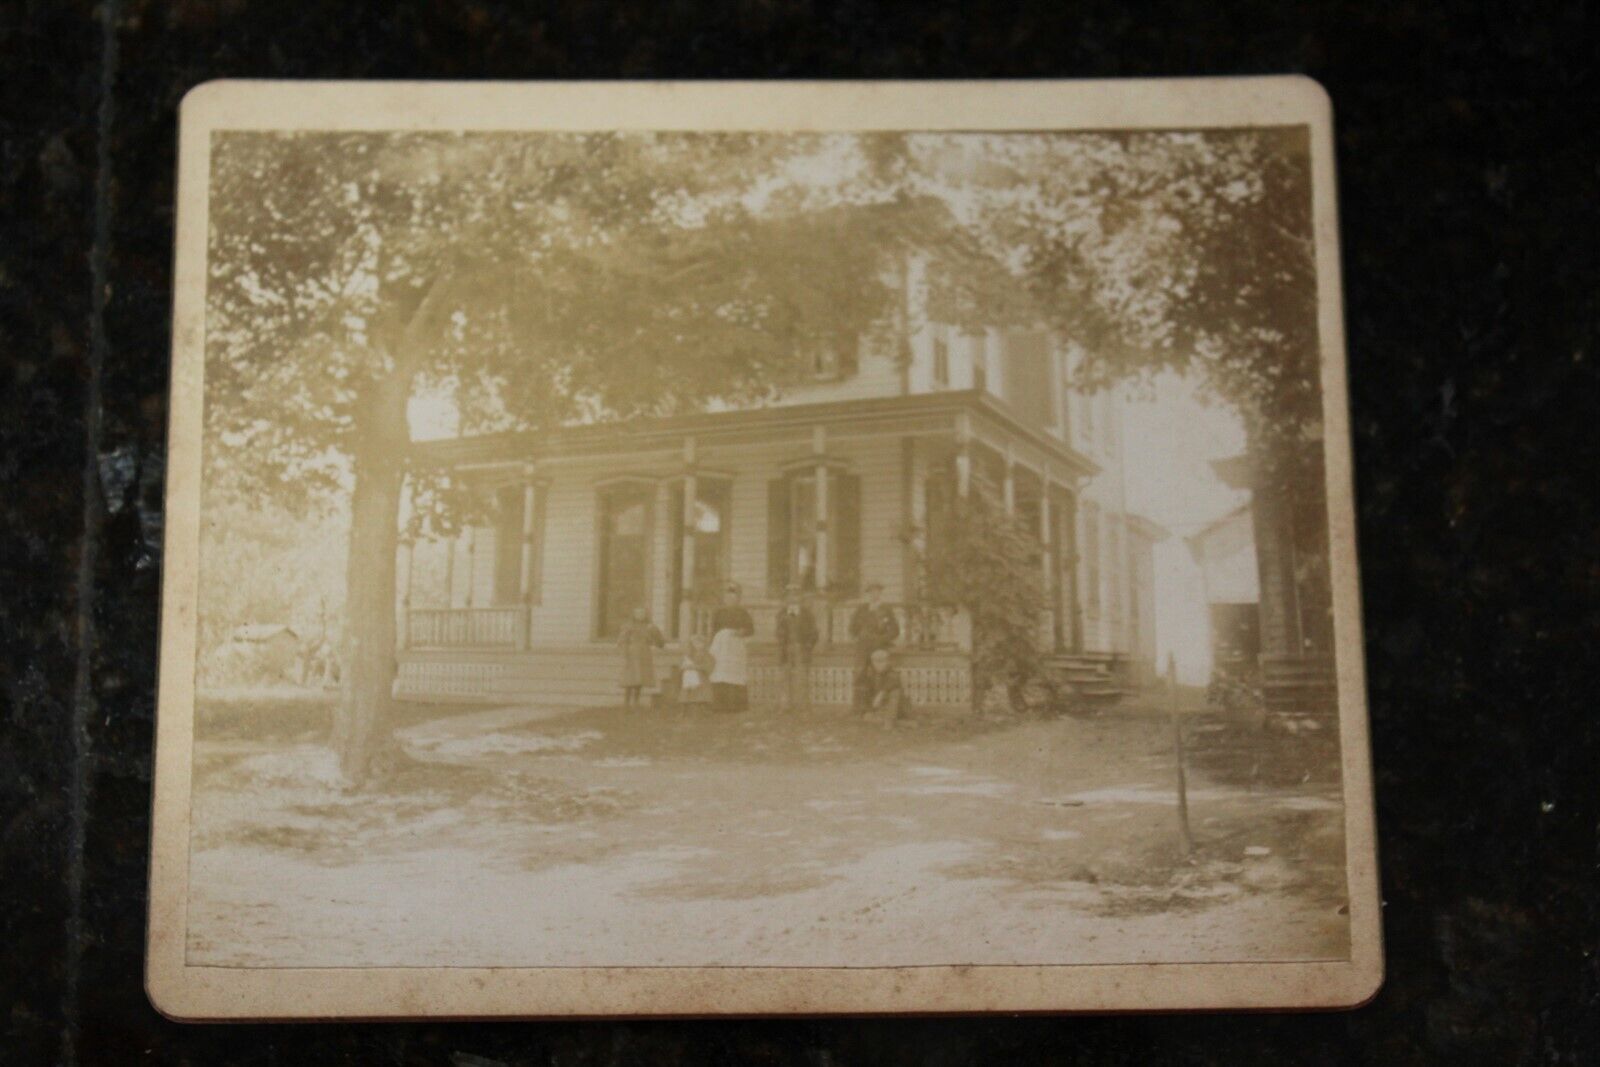 Antique Black & White Photo Cabinet Card Family Front Of 2 Story Victorian Home